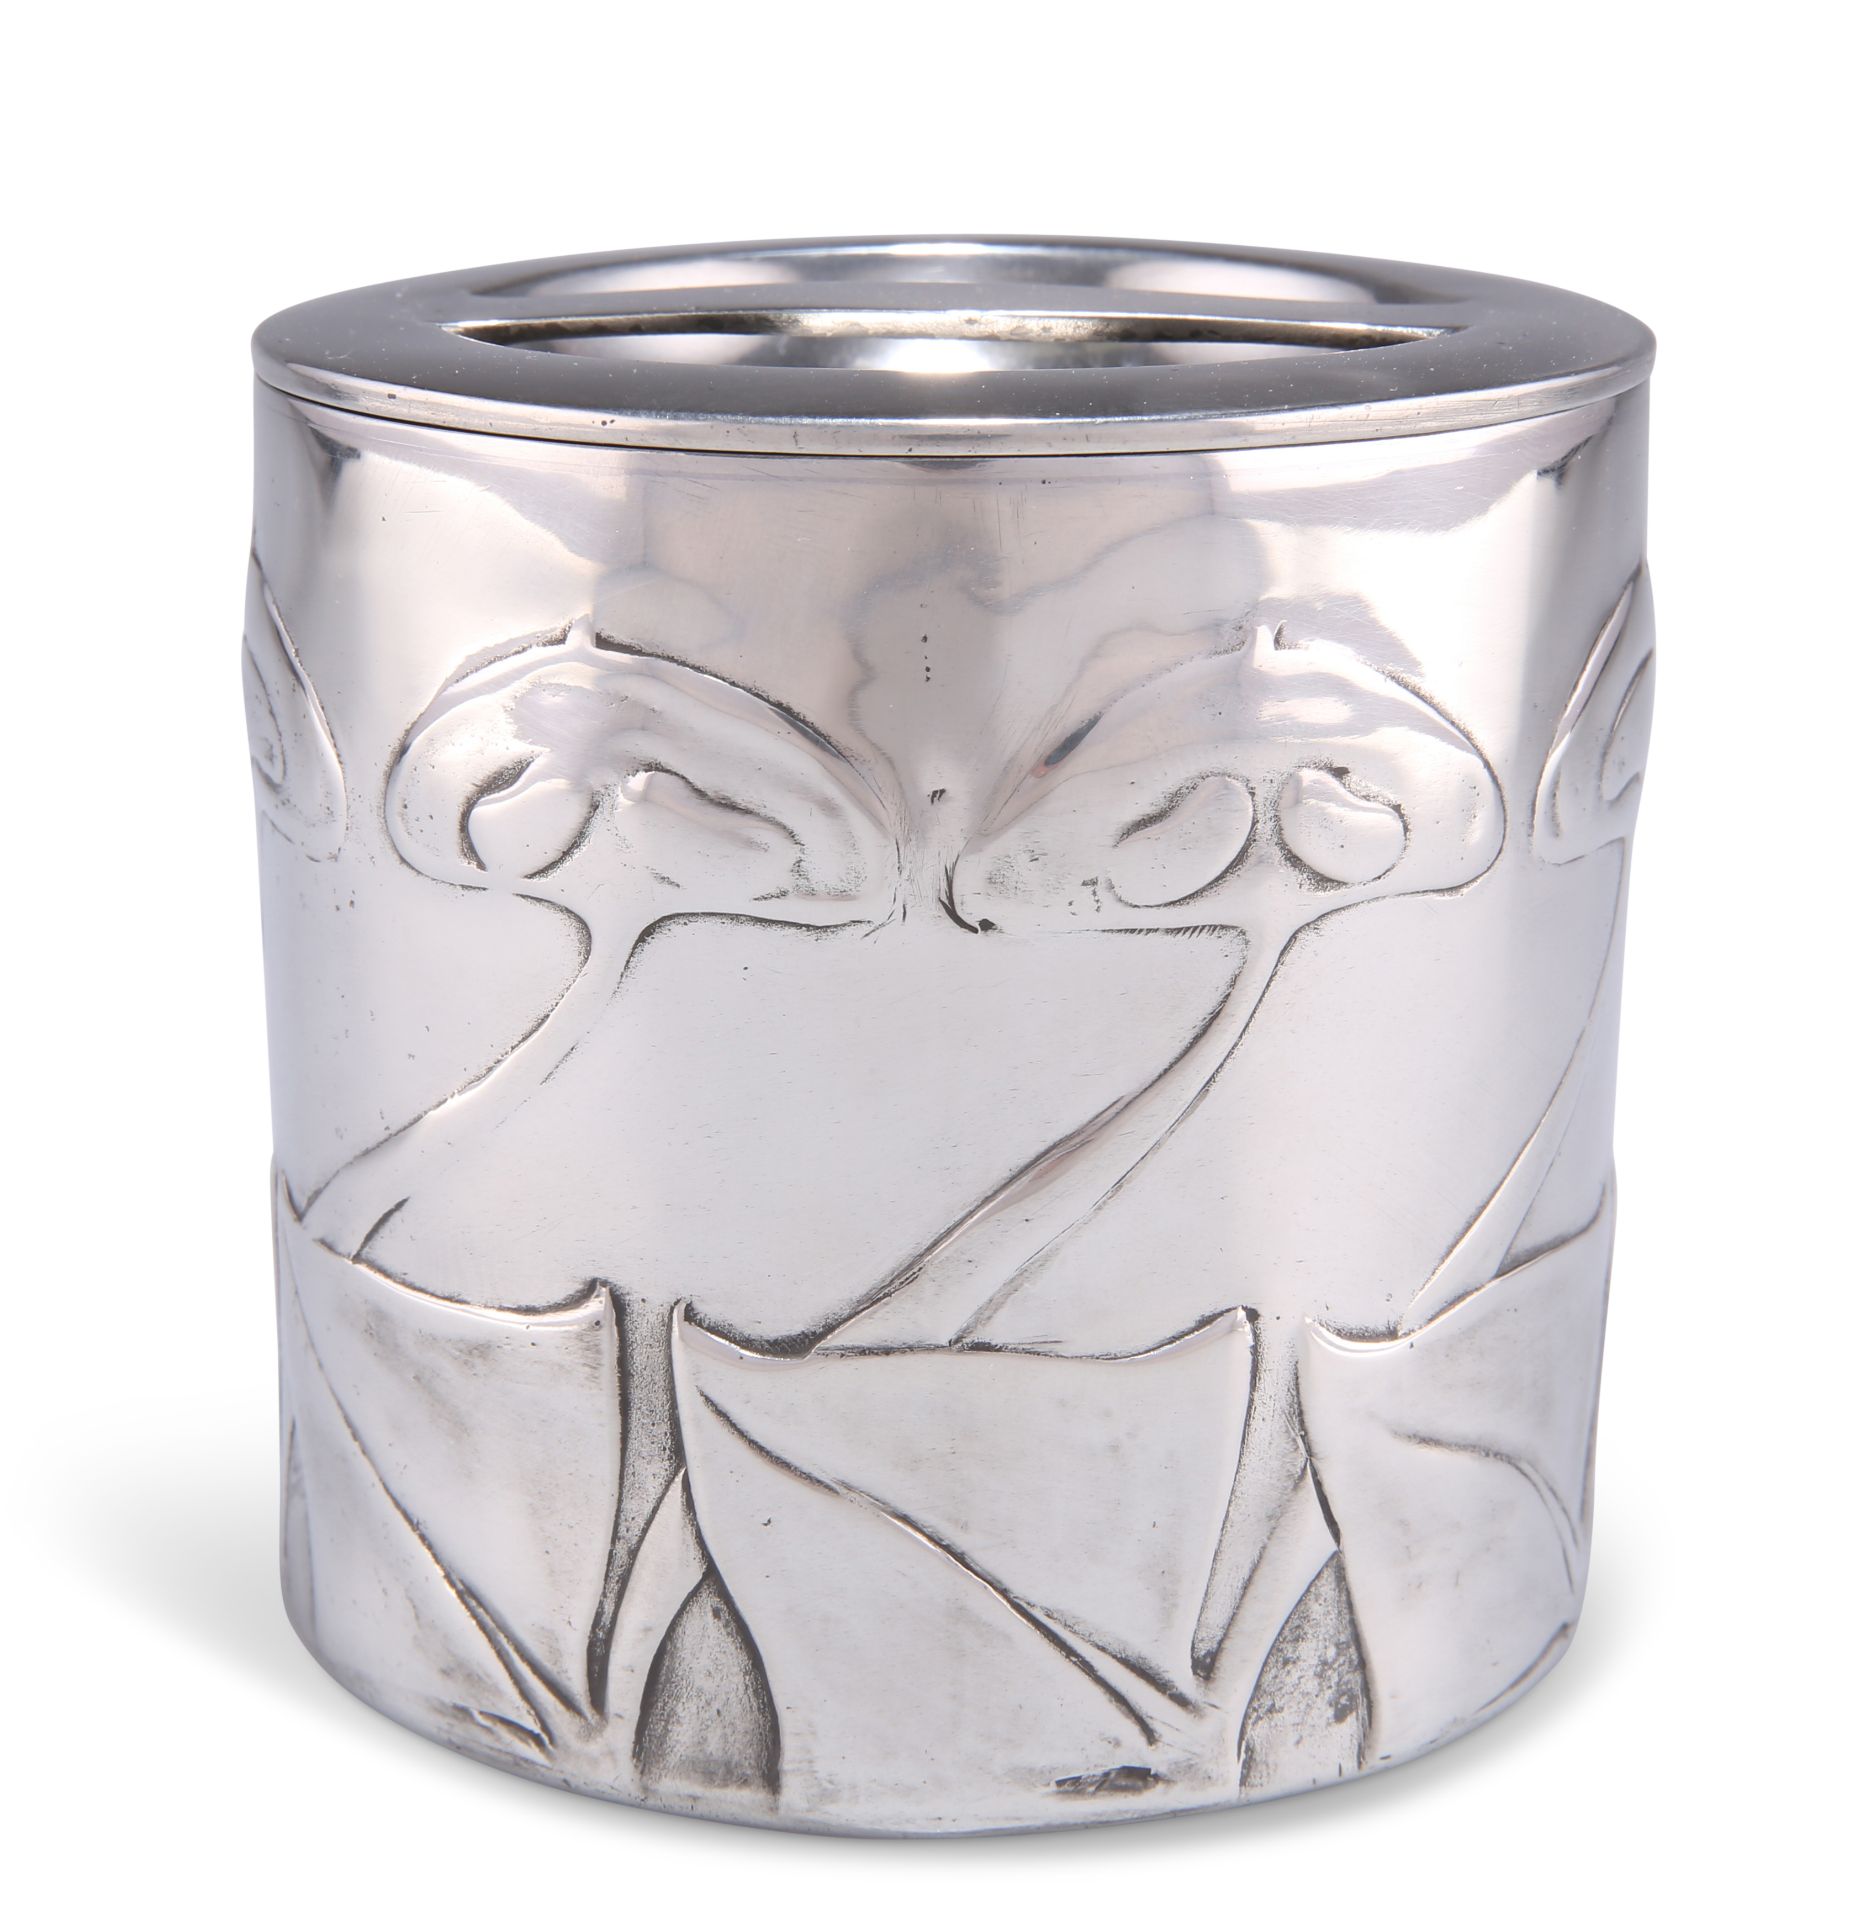 ARCHIBALD KNOX (1864-1933), A LIBERTY & CO TUDRIC PEWTER BISCUIT BOX